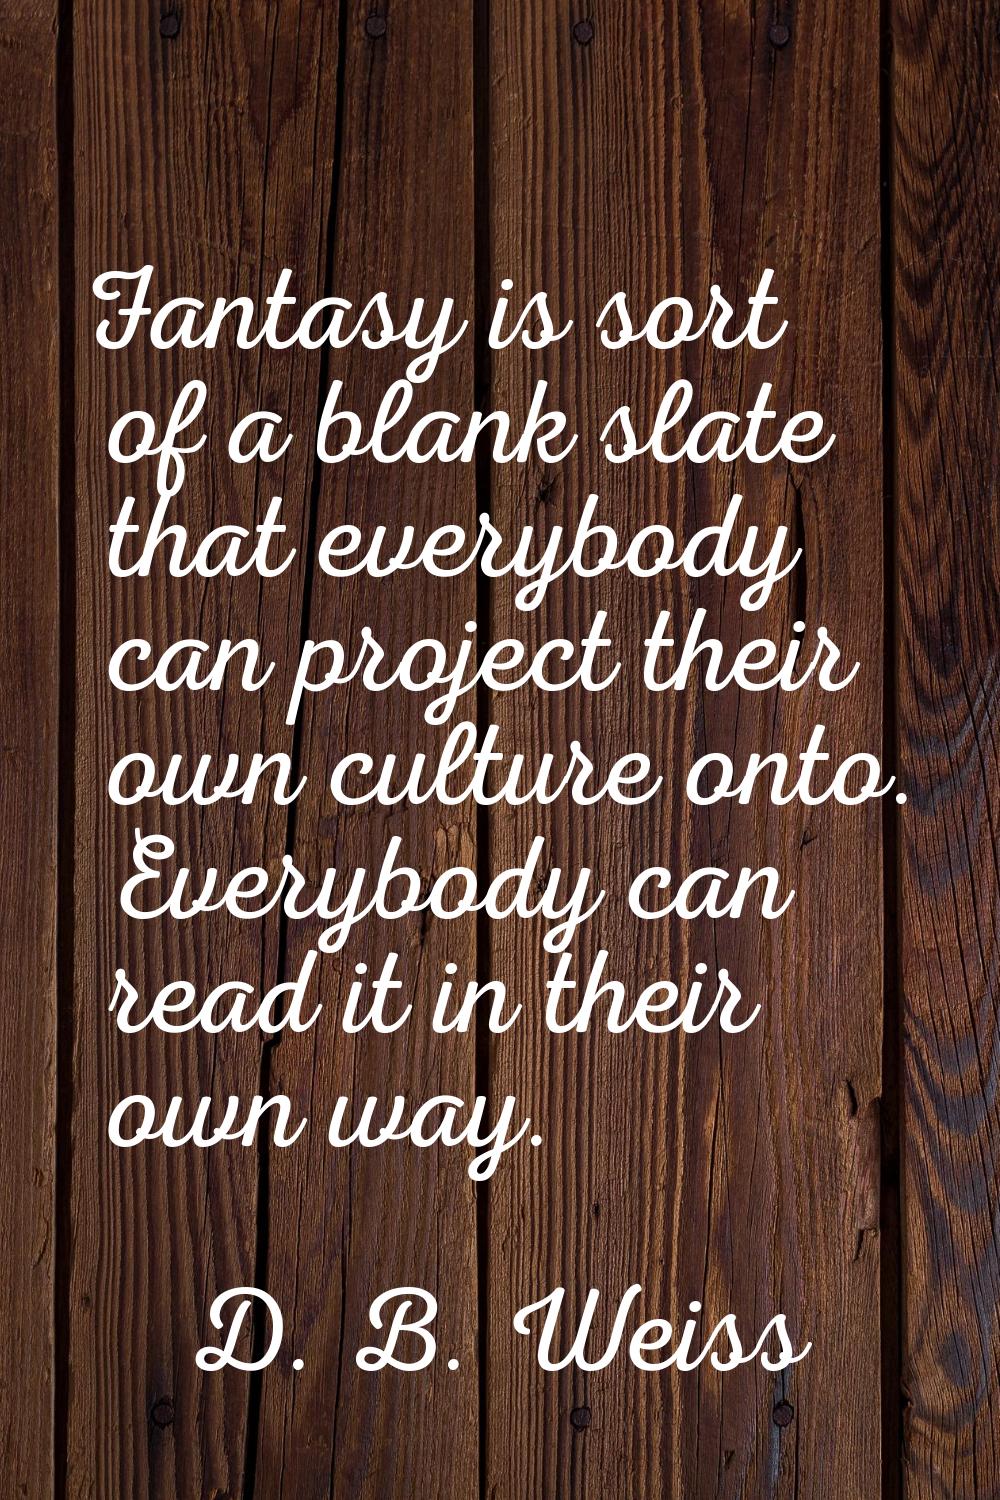 Fantasy is sort of a blank slate that everybody can project their own culture onto. Everybody can r